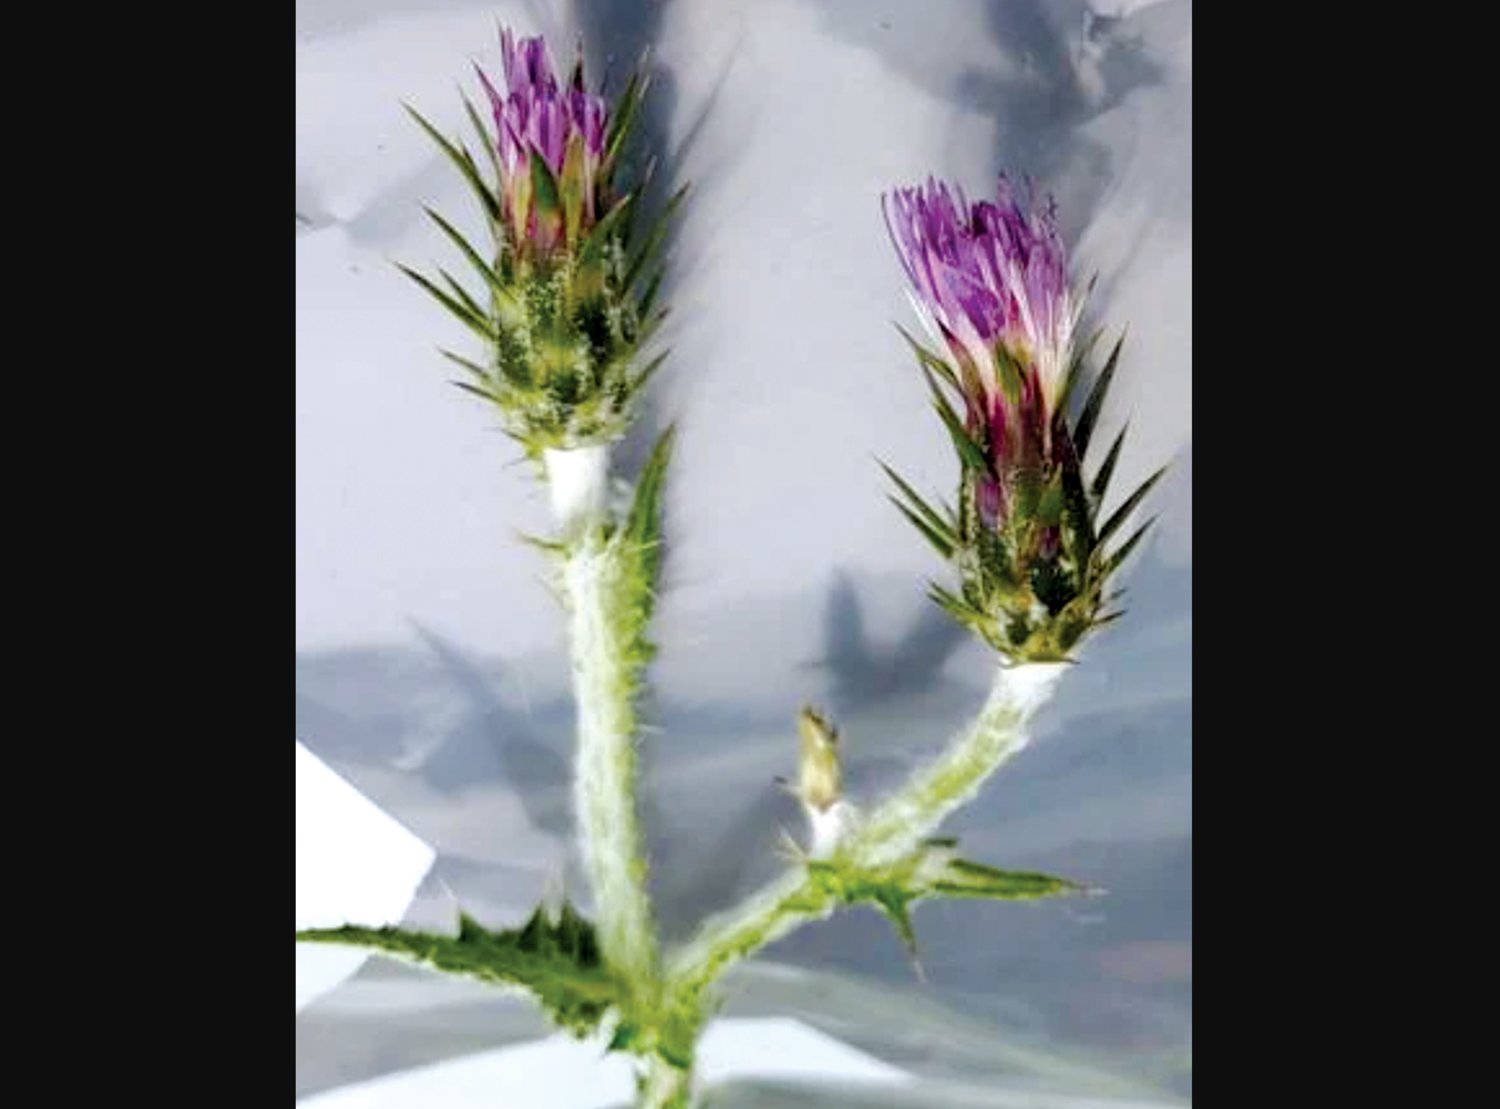 The Turkish Thistle is a noxious weed found recently found in Kalama. It has narrow purple flowers, spiny leaves and winged stems covered in wooly hairs.